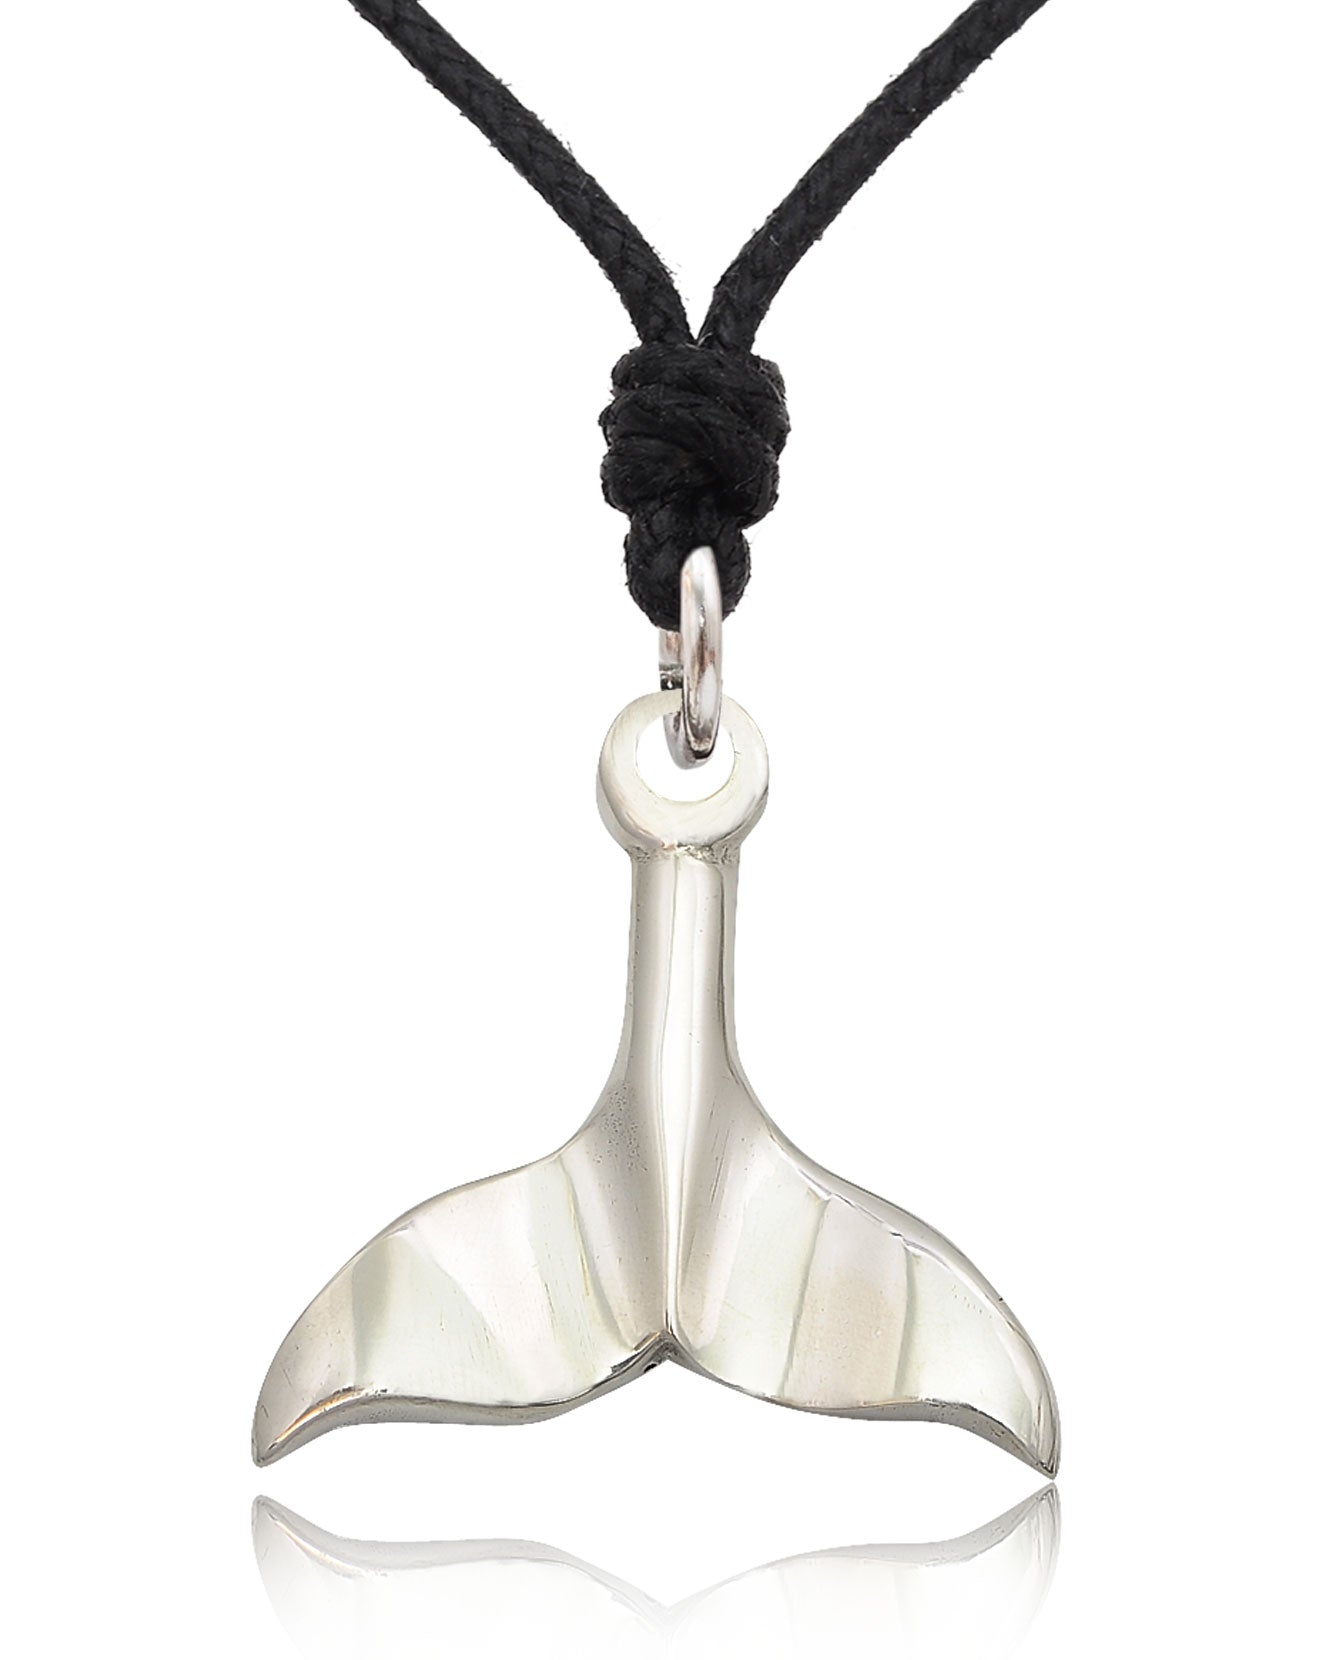 Unique Whale Tail Silver Pewter Brass Charm Necklace Pendant Jewelry